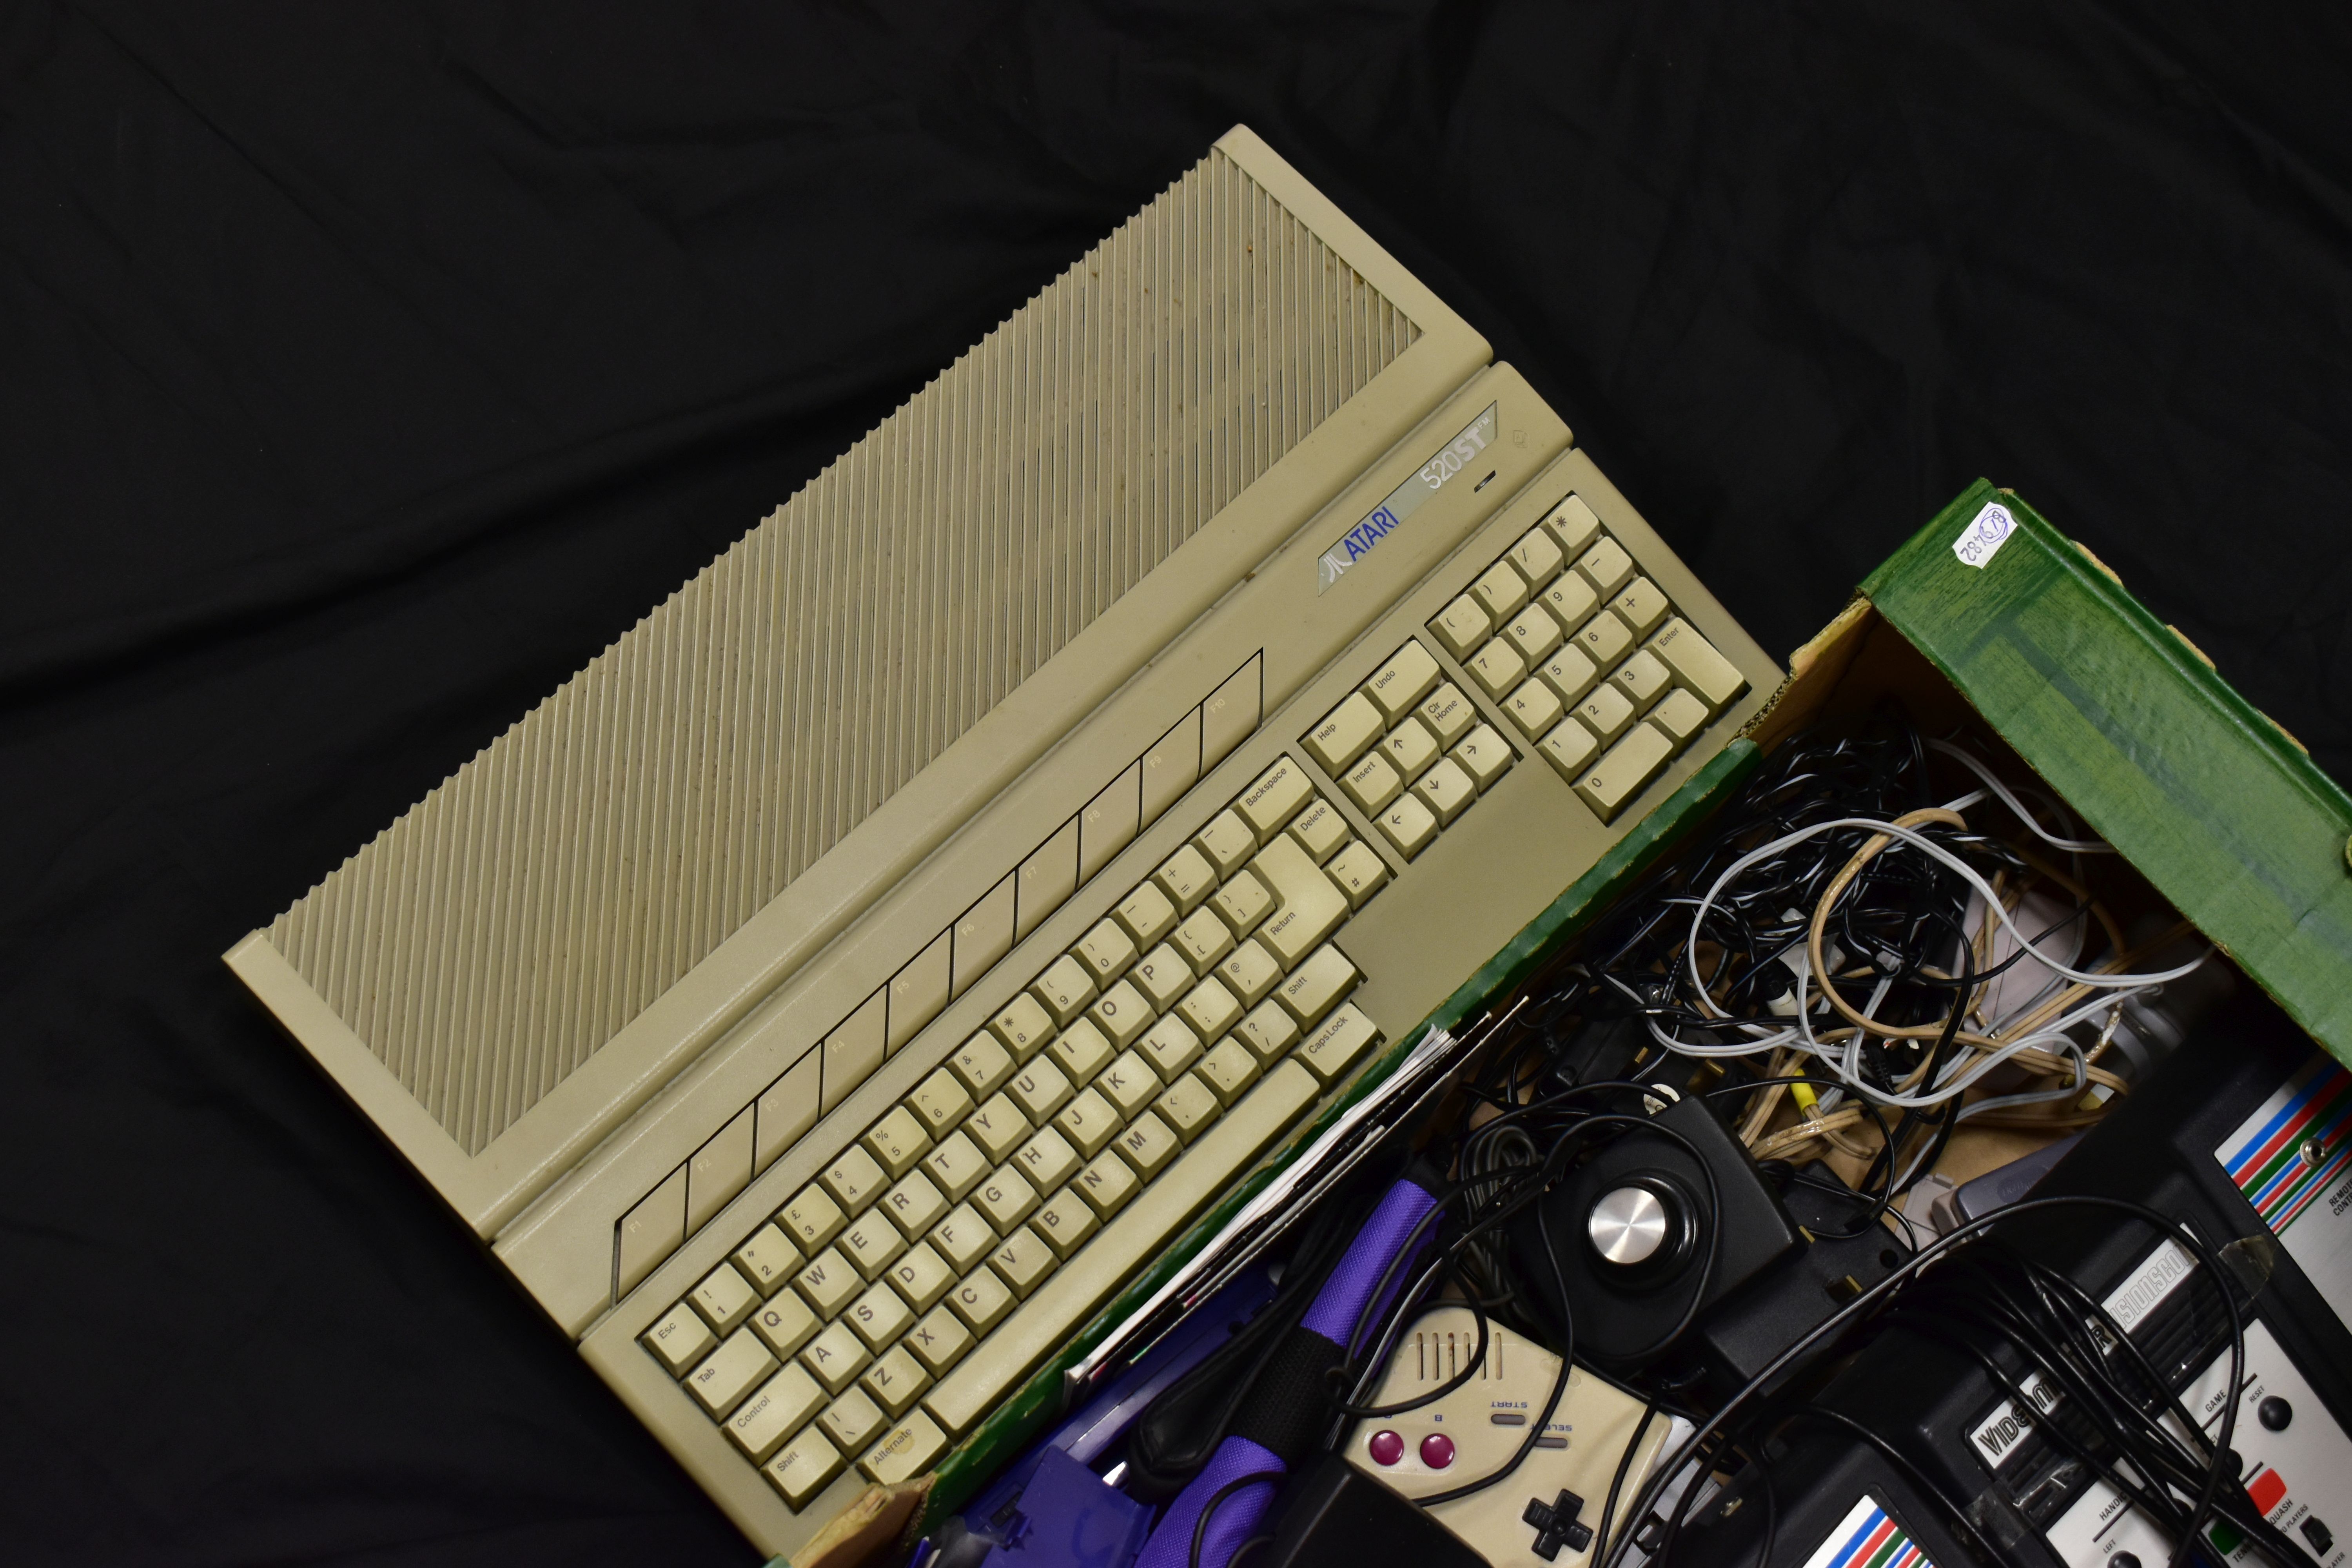 TWO TRAYS CONTAINING GAMING EQUIPMENT including an Atari 520STFM Personal Computer with power cable, - Image 2 of 5